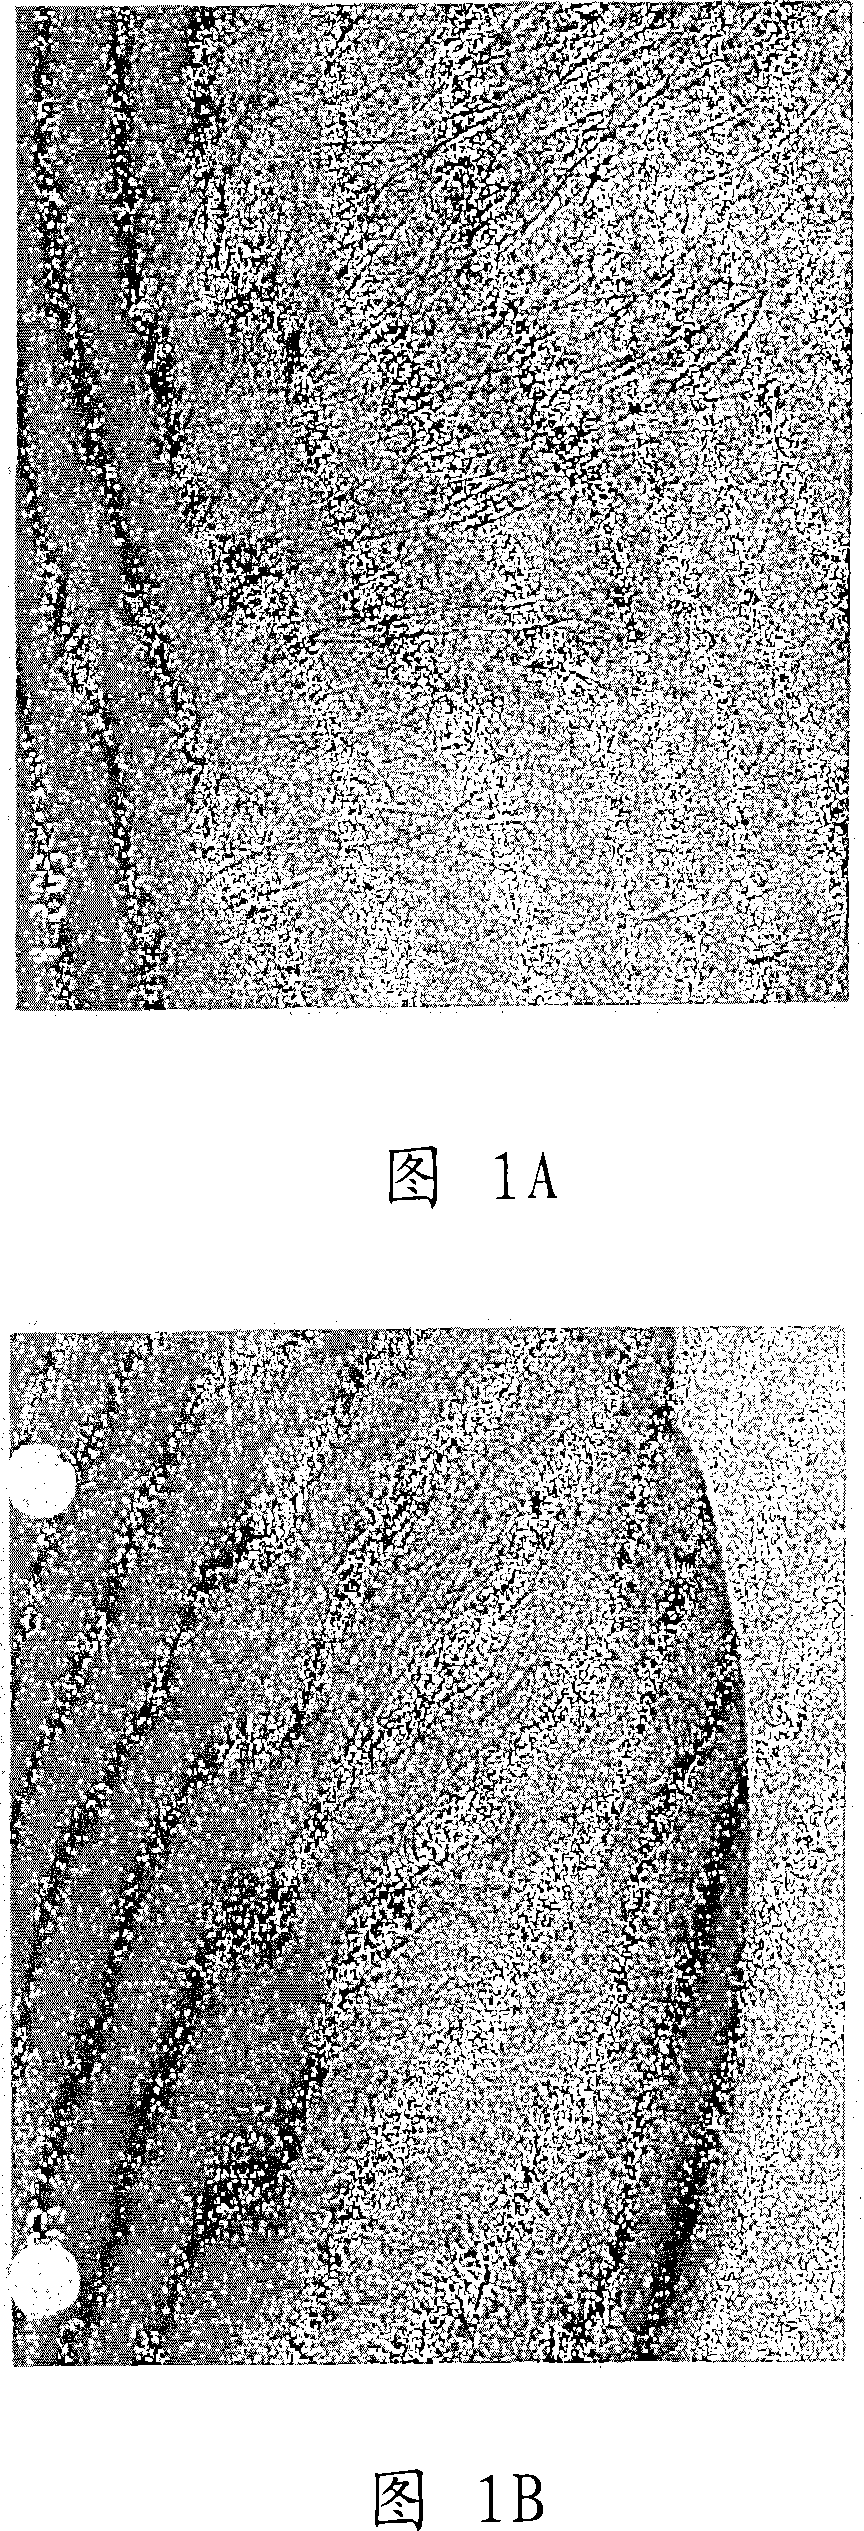 Method of treating granuloma annulare or sarcoid